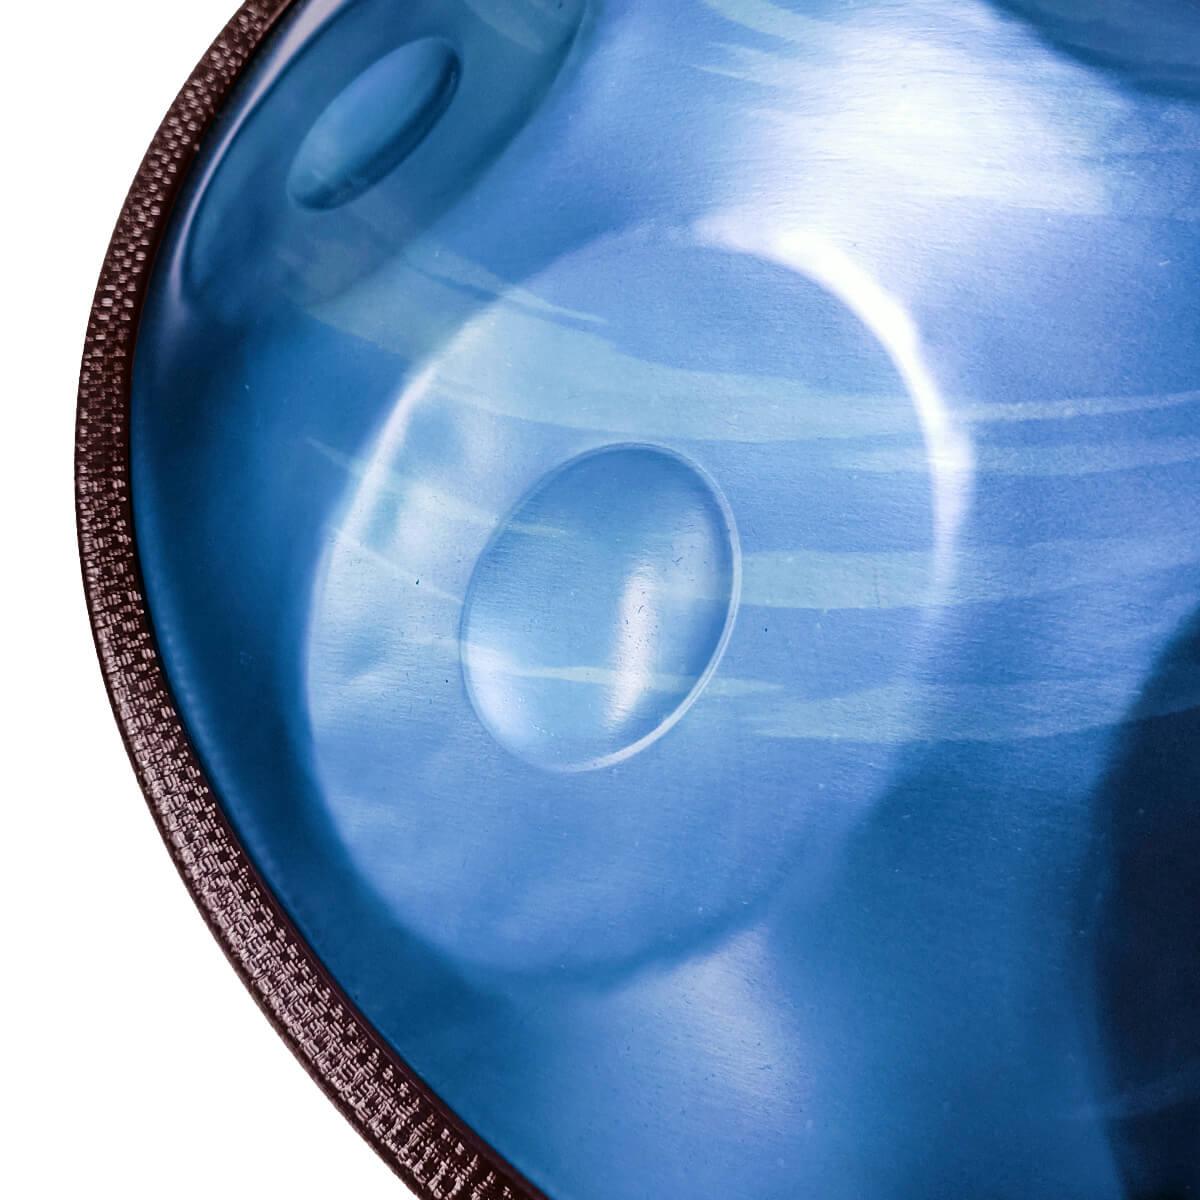 AS TEMAN Handpan Black-Hole 10 Notes D Minor Scale Blue hangdrum with gift set - HLURU.SHOP